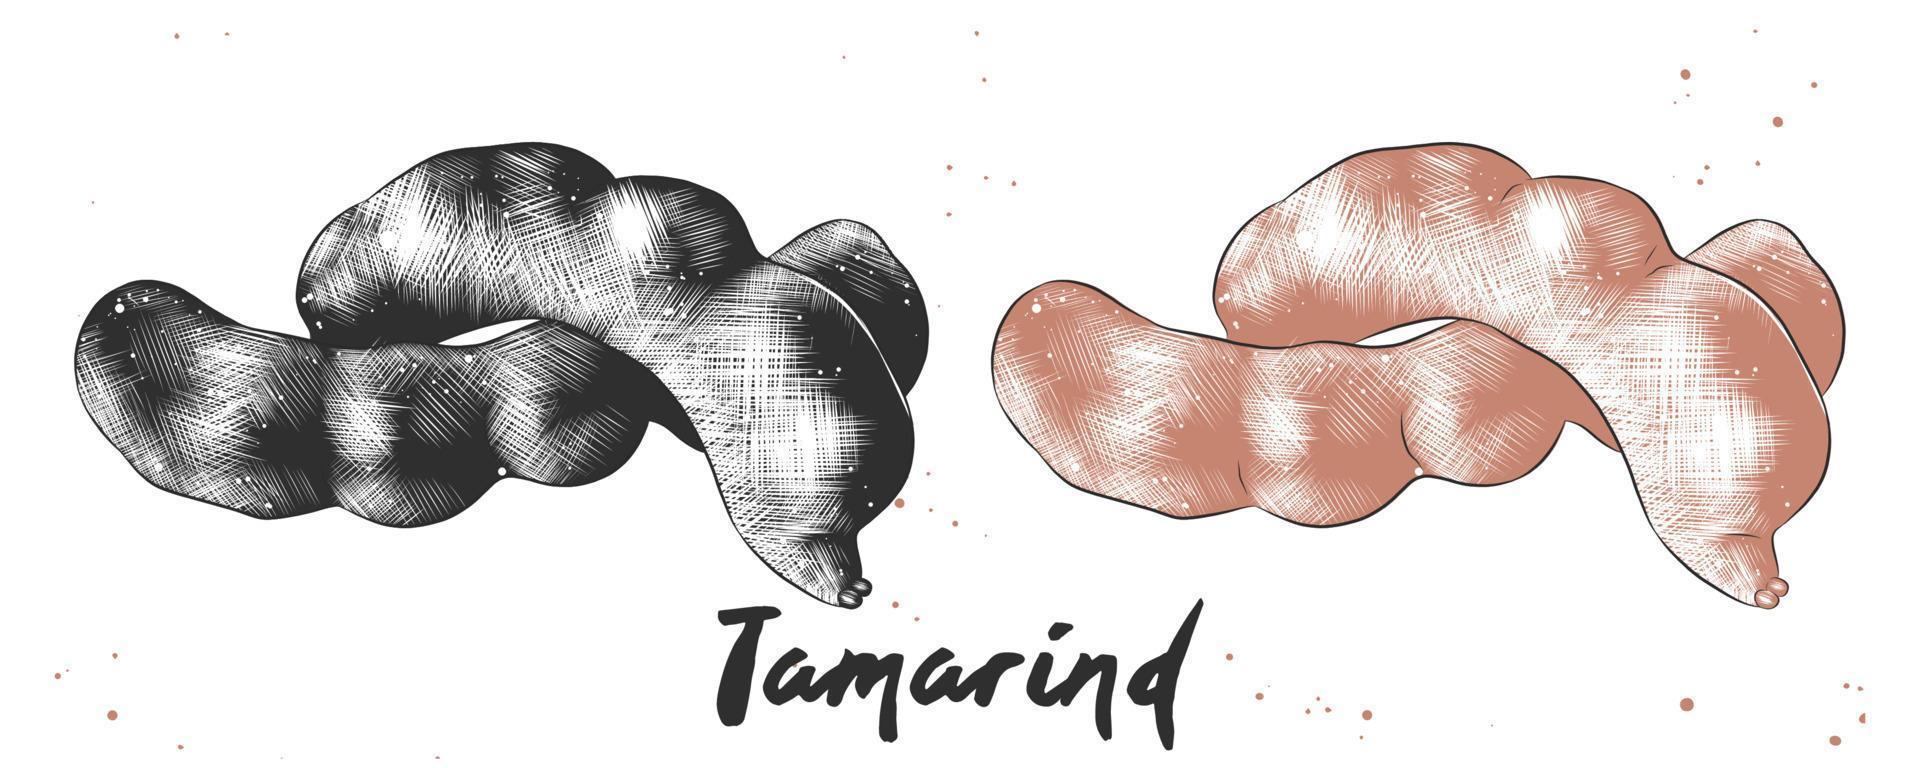 Vector engraved style illustration for posters, decoration and print. Hand drawn sketch of tamarind in monochrome and colorful. Detailed vegetarian food drawing.